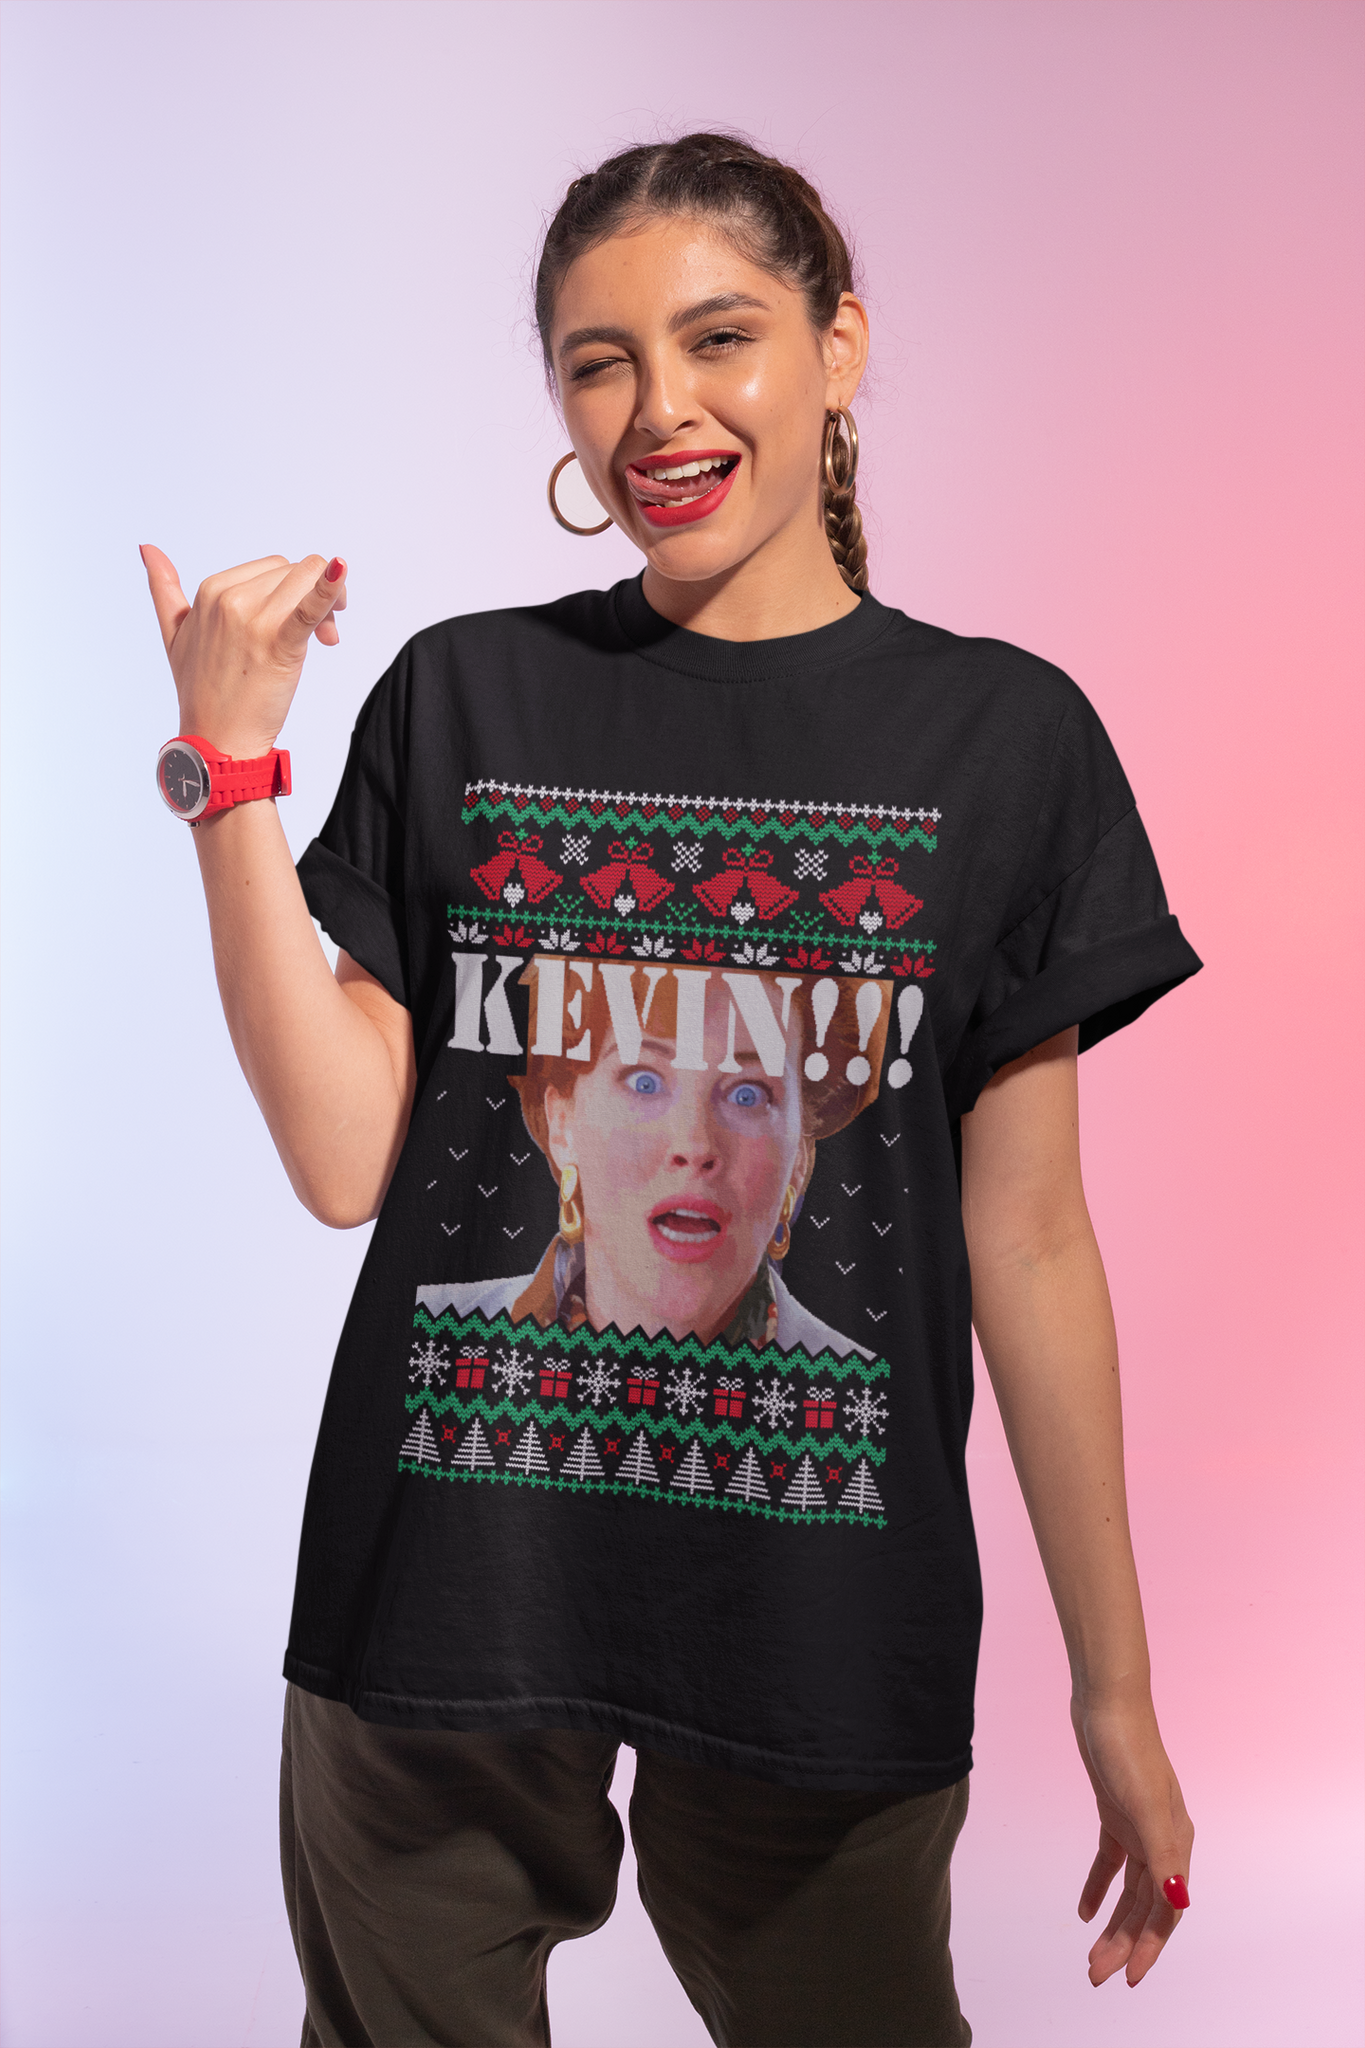 Home Alone Ugly Sweater Shirt, Kevin Tshirt, Kate McCallister T Shirt, Christmas Gifts